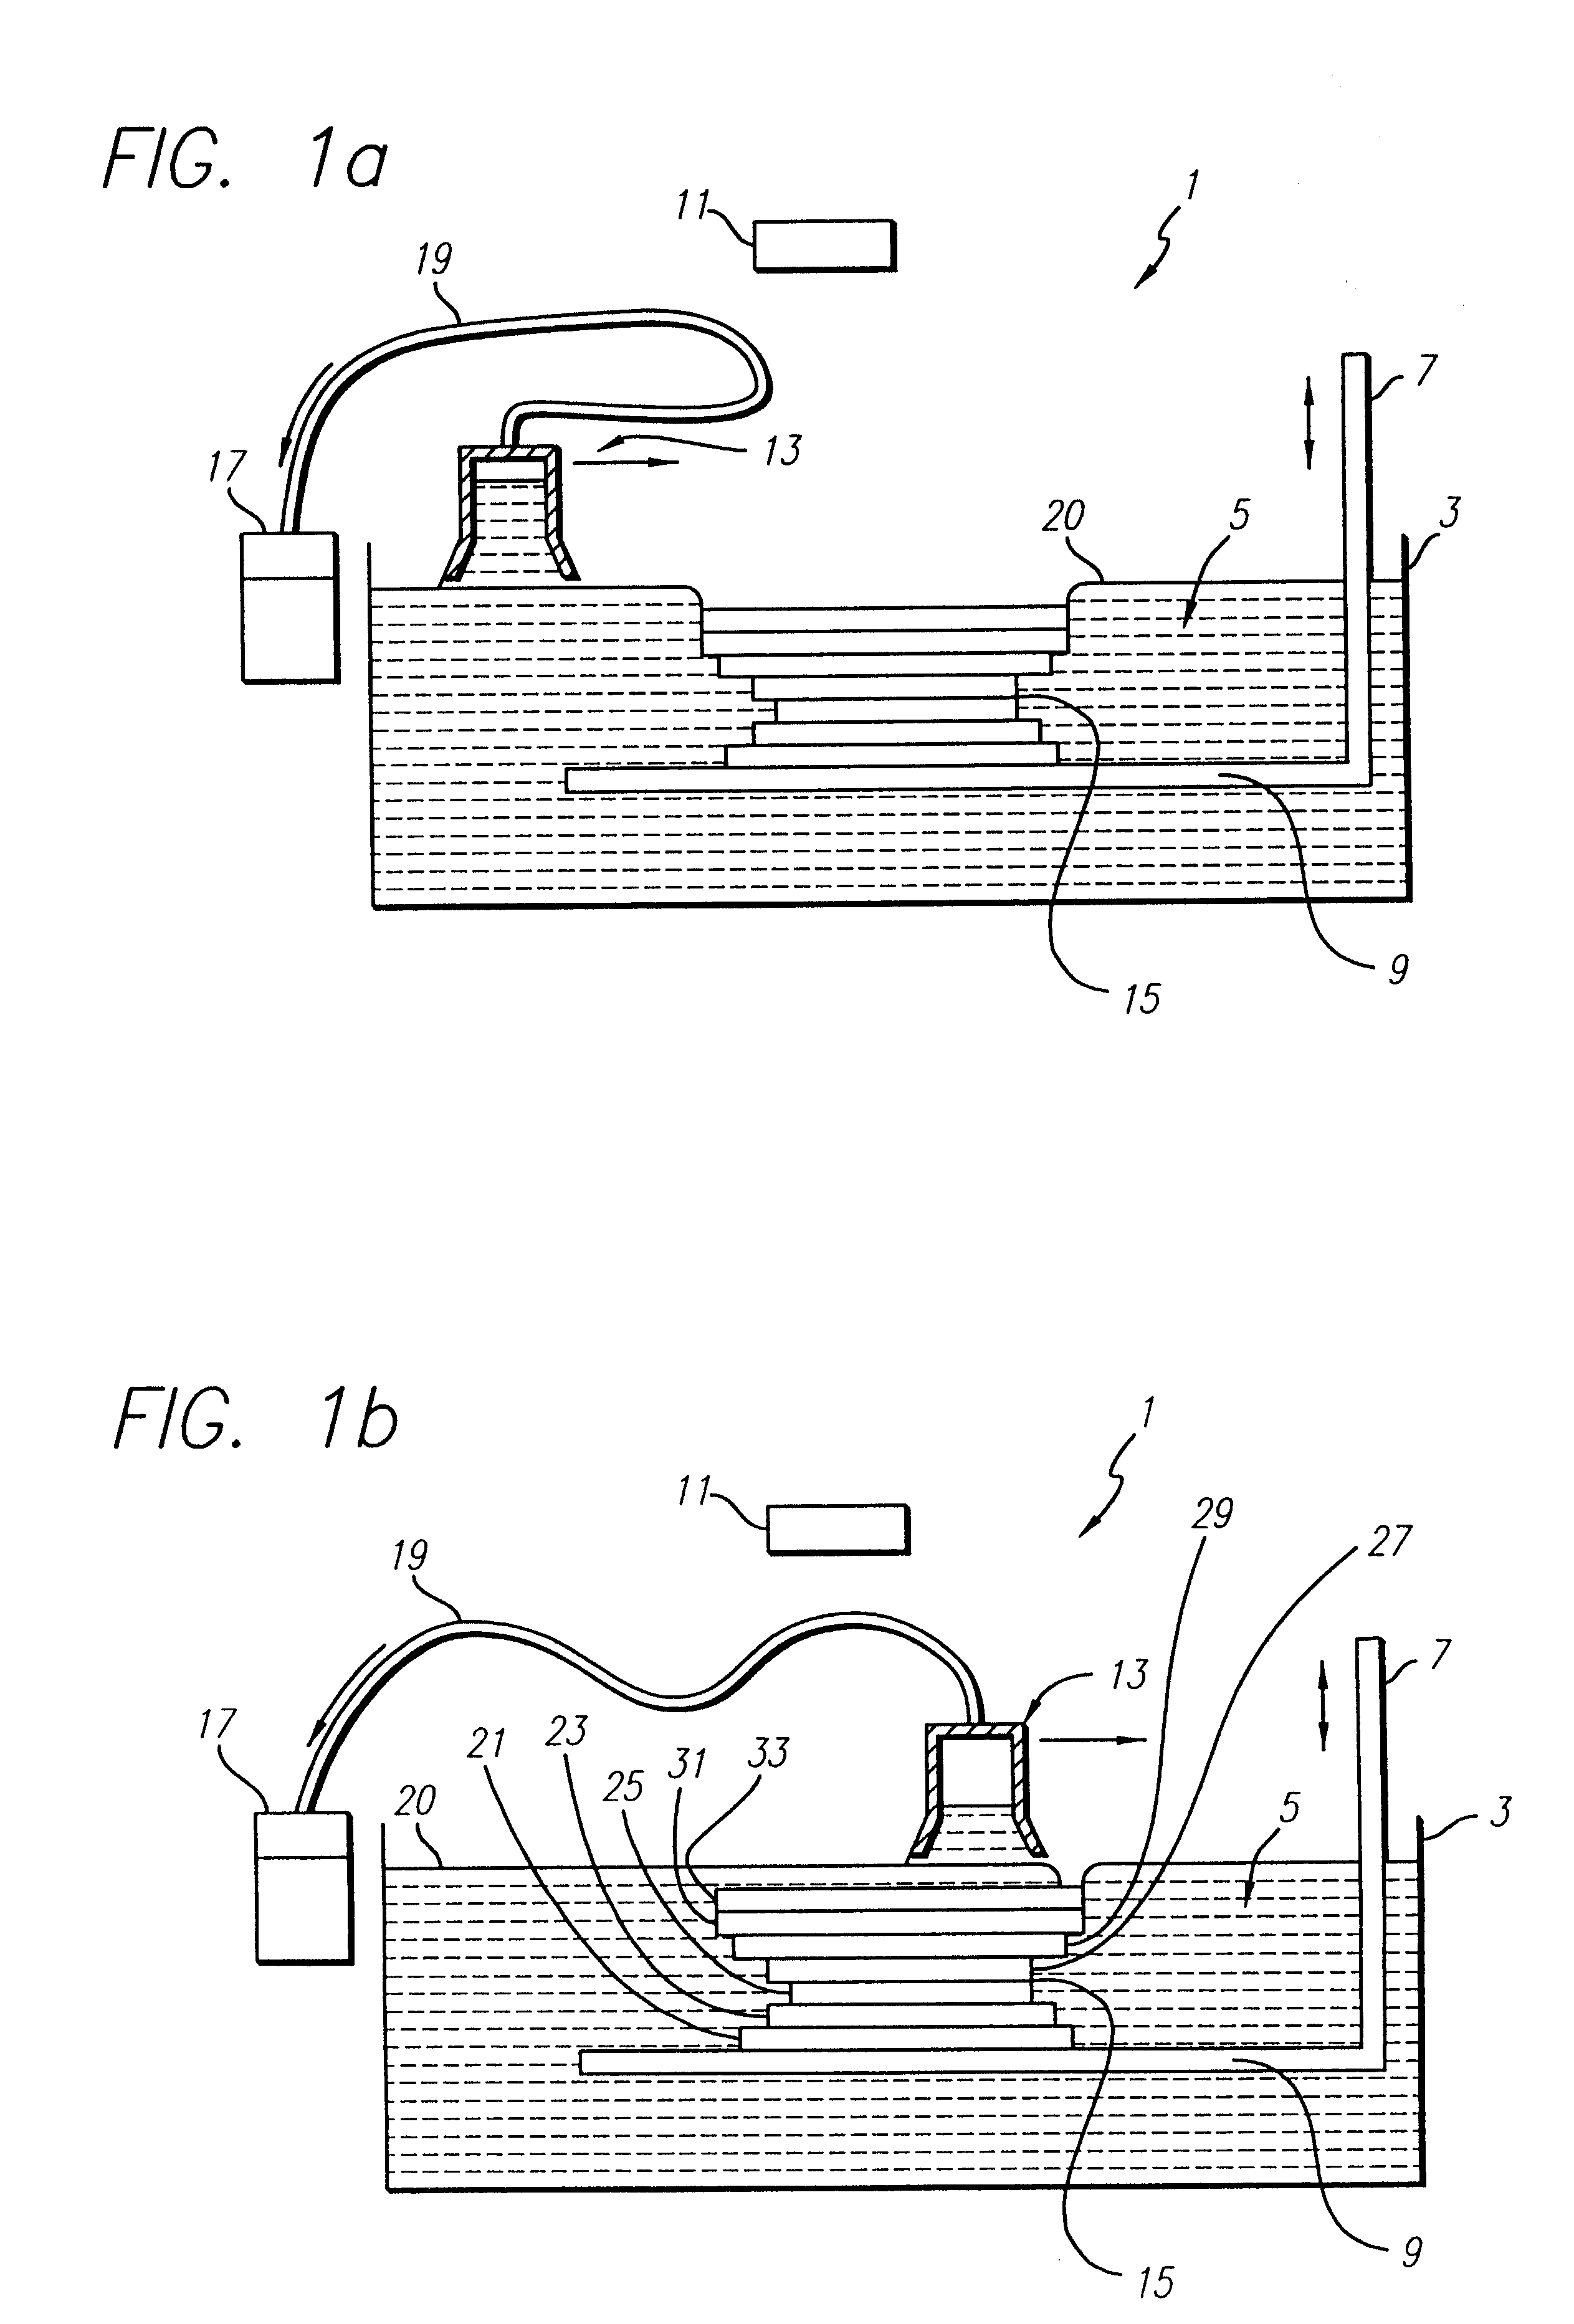 Stereolithographic method and apparatus for production of three dimensional objects using multiple beams of different diameters